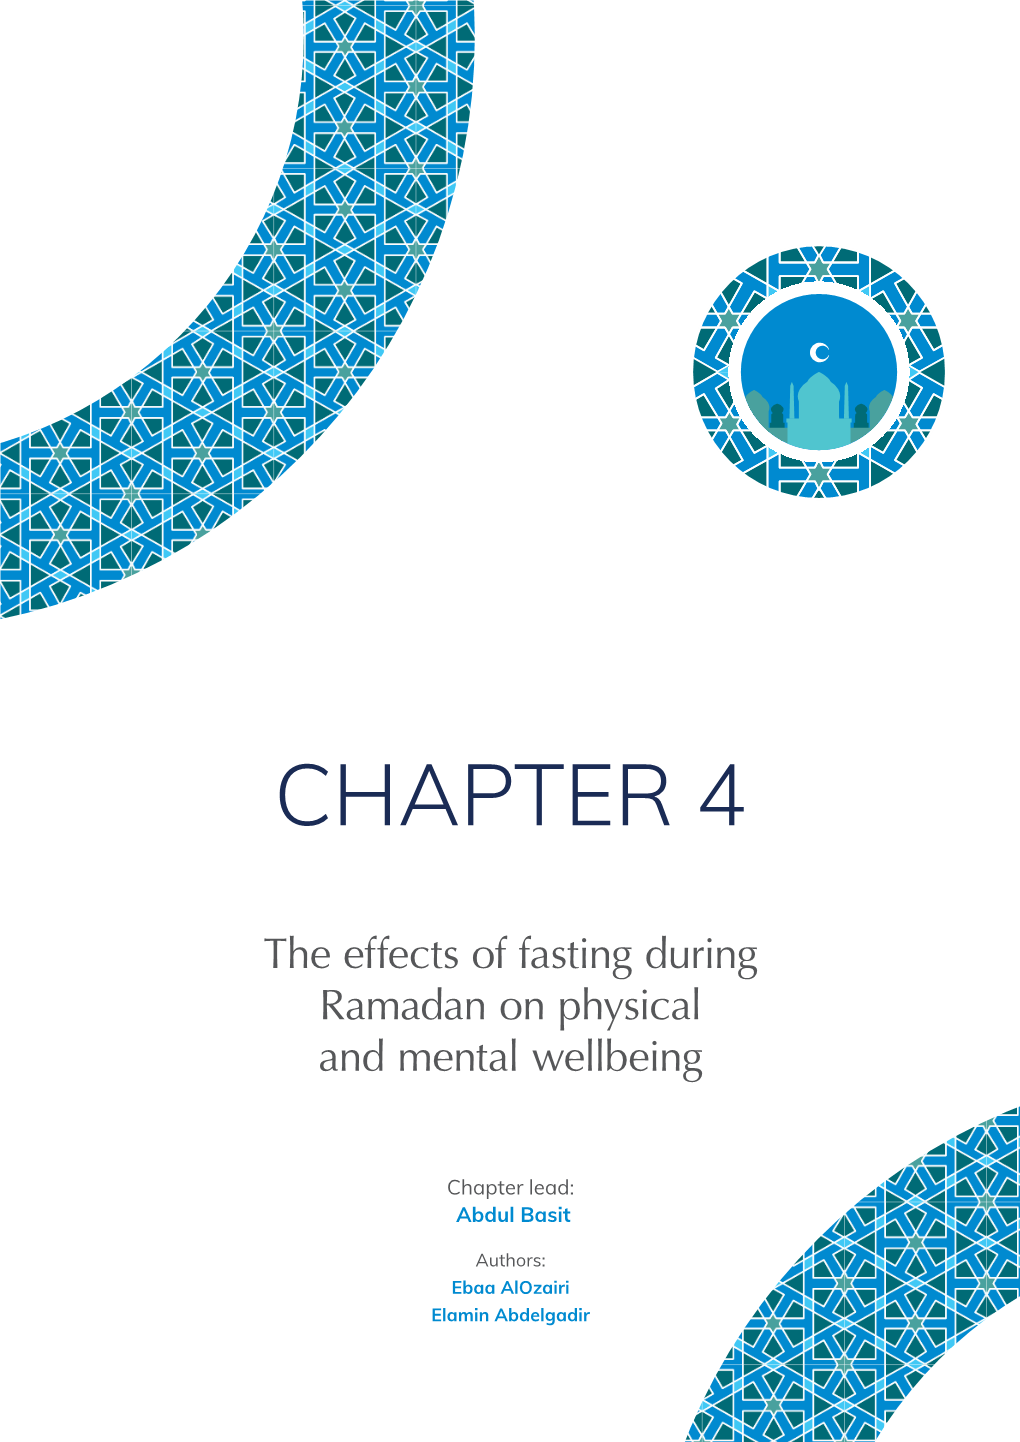 The Effects of Fasting During Ramadan on Physical and Mental Wellbeing